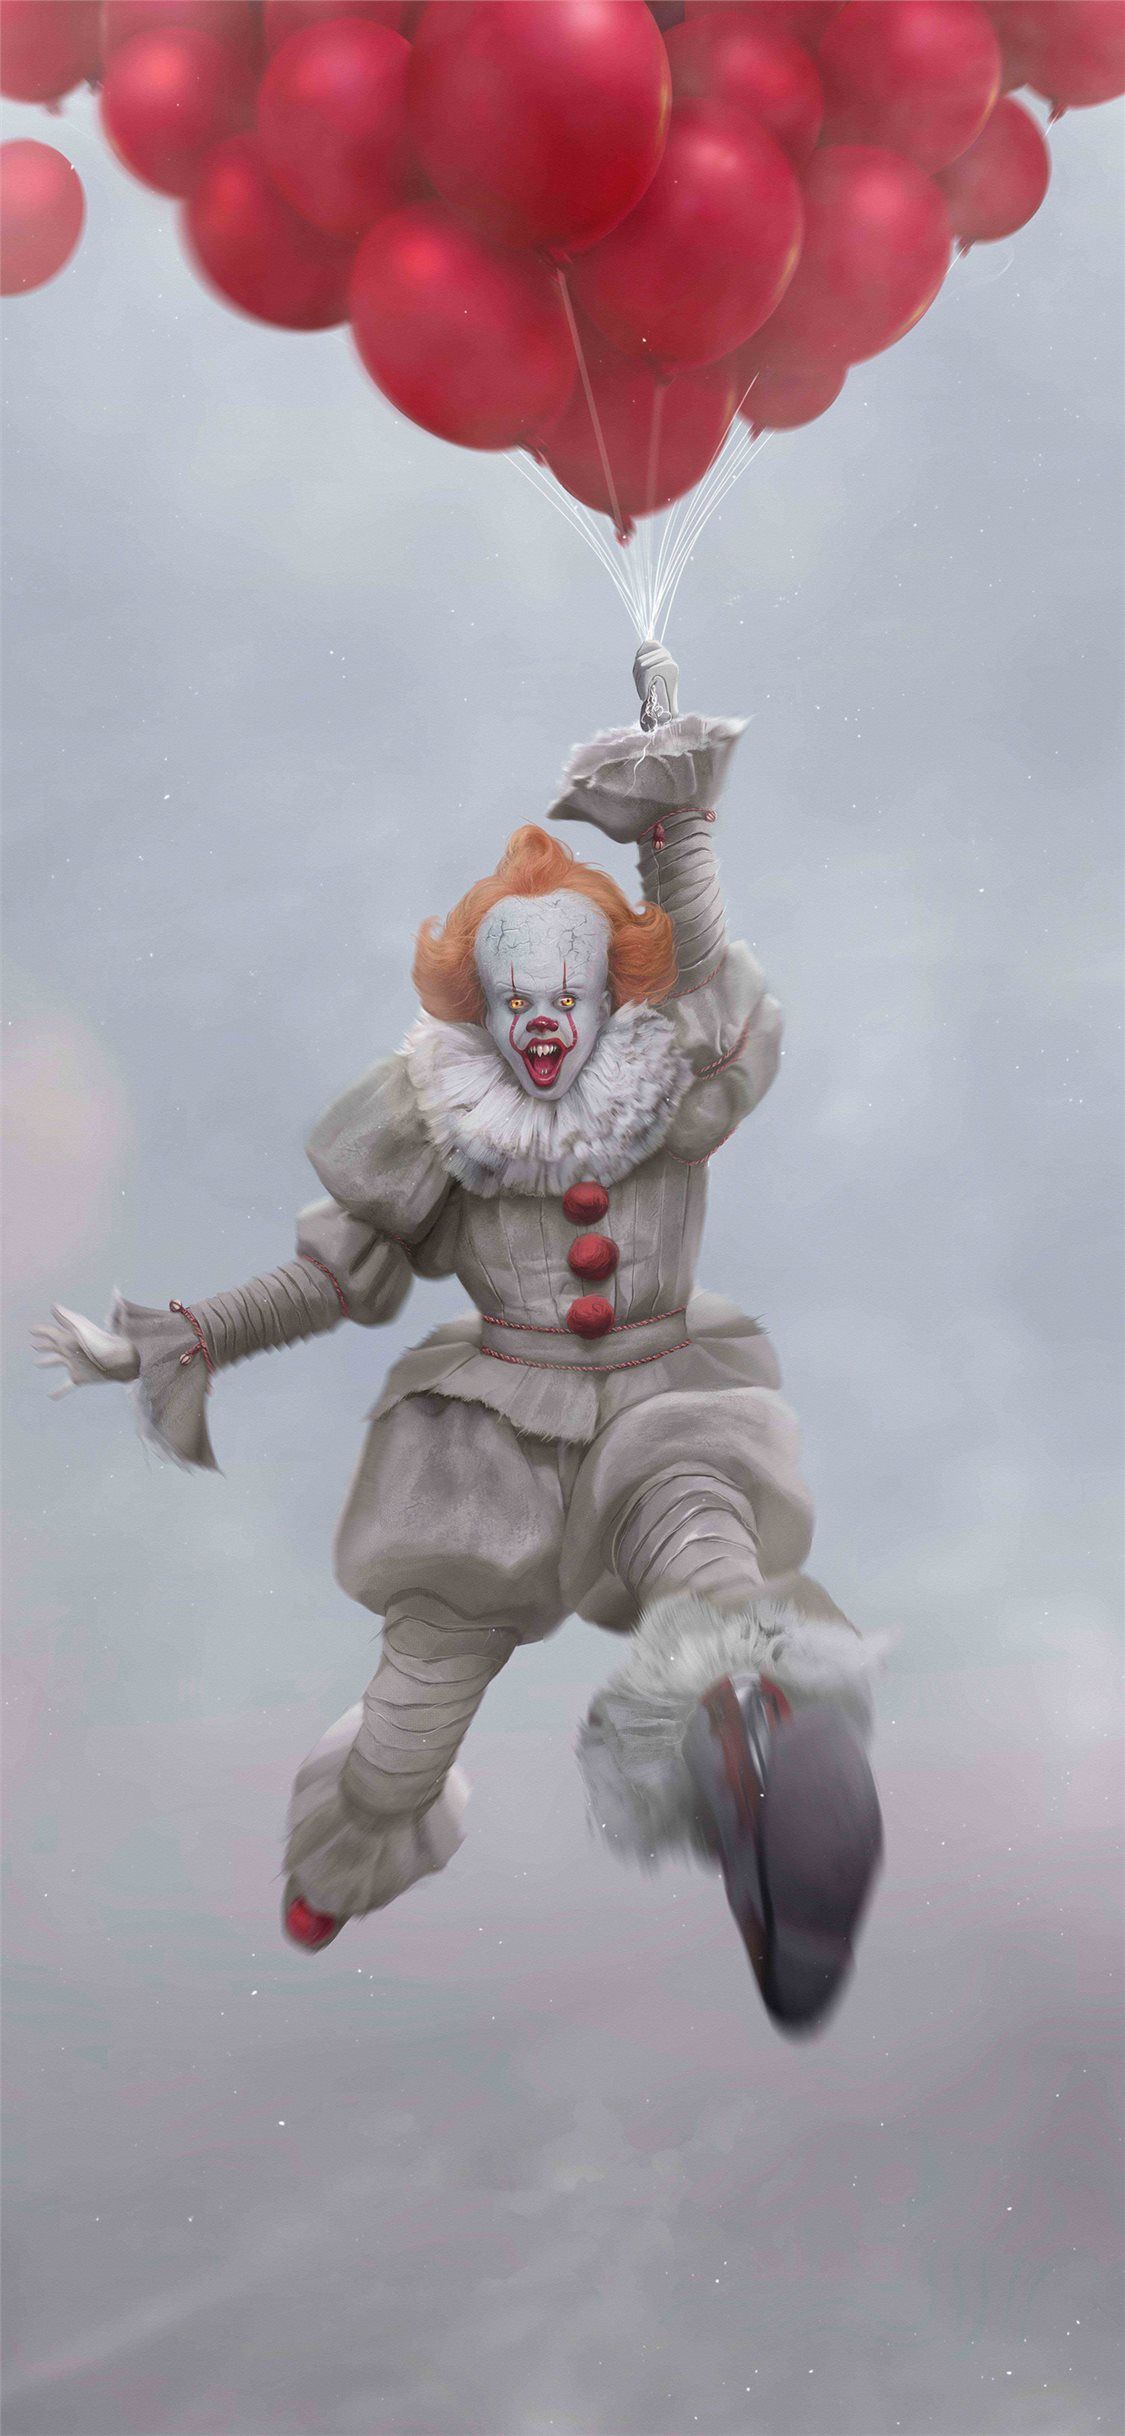 pennywise 8k iPhone X Wallpaper Free Download